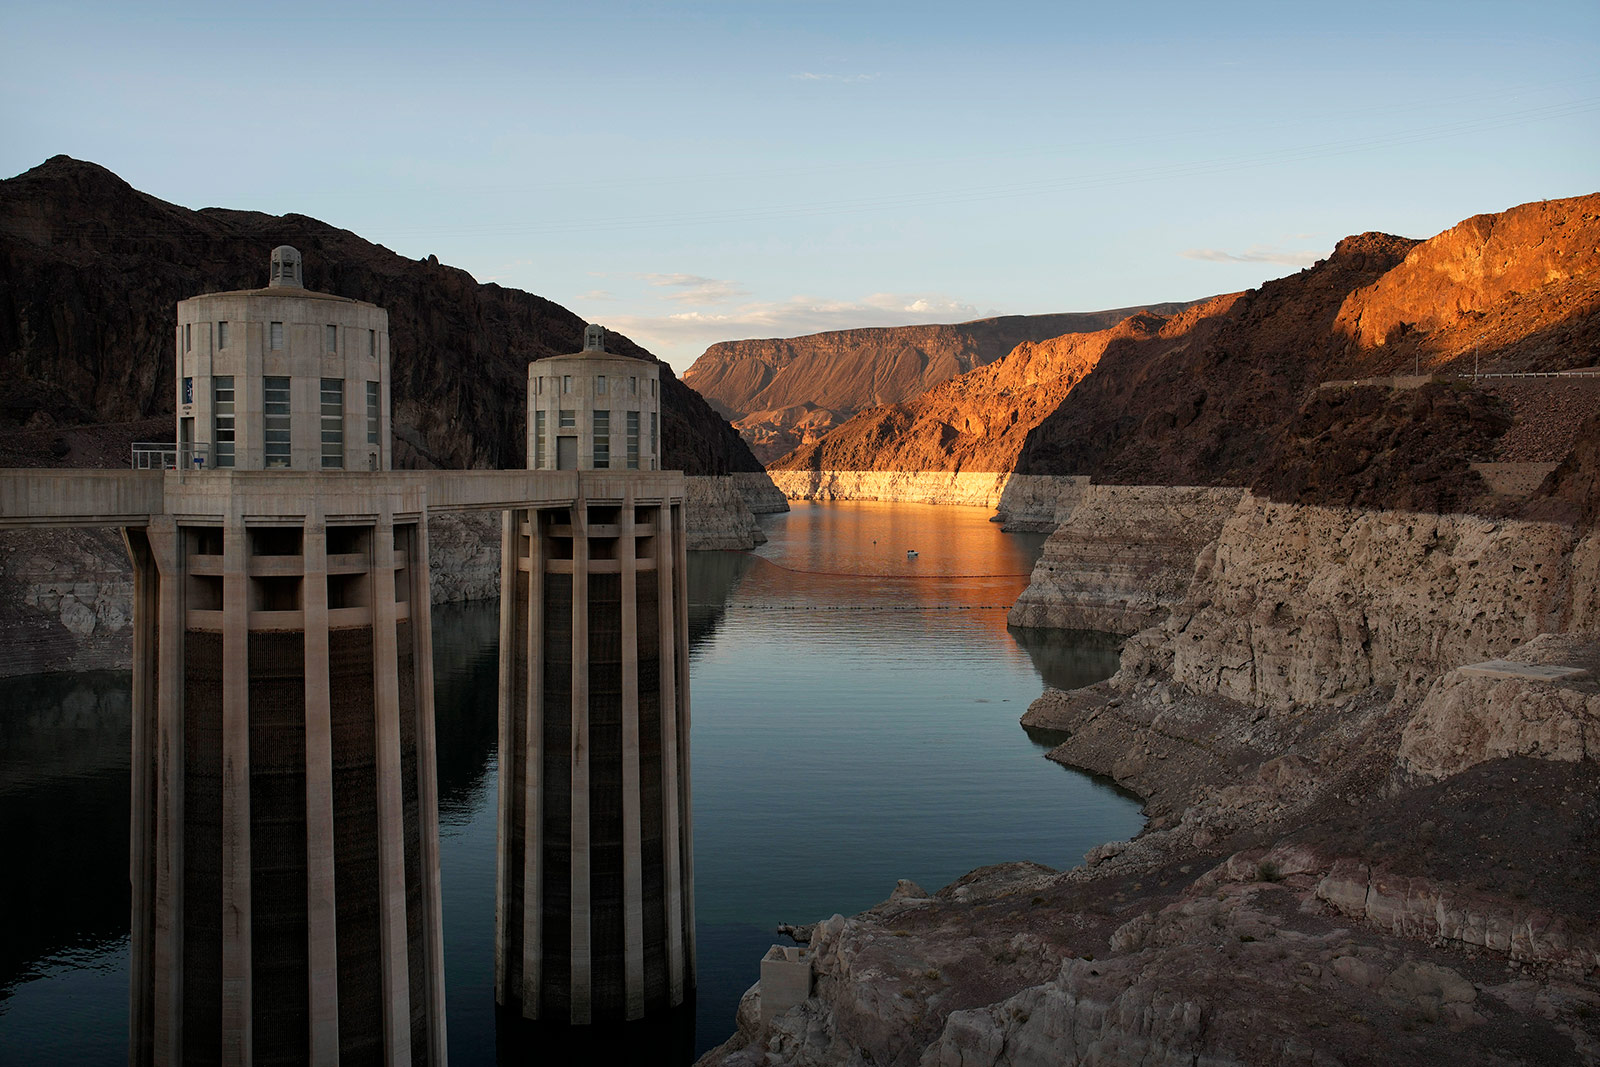 The high water line of Lake Mead near water intakes on the Arizona side of Hoover Dam